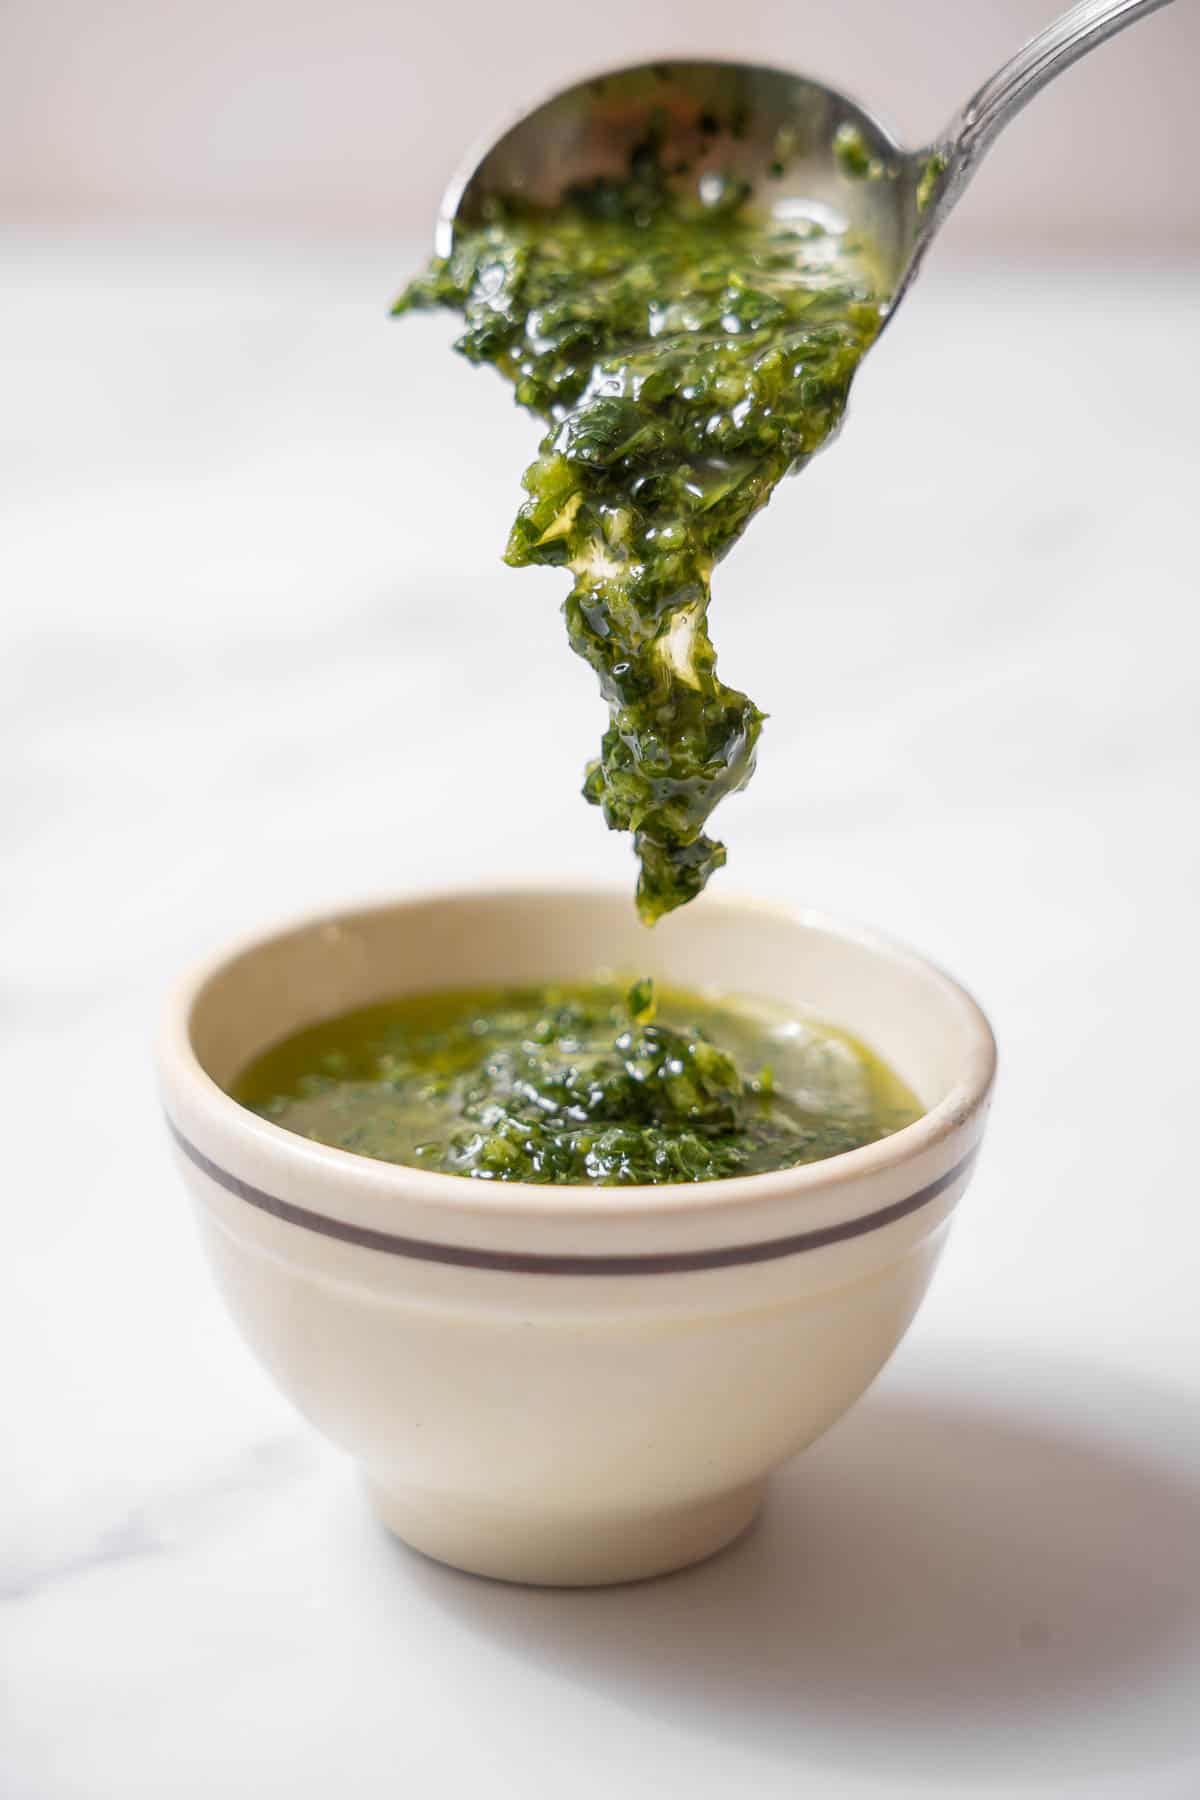 pouring a spoonful of mojo verde into a bowl.